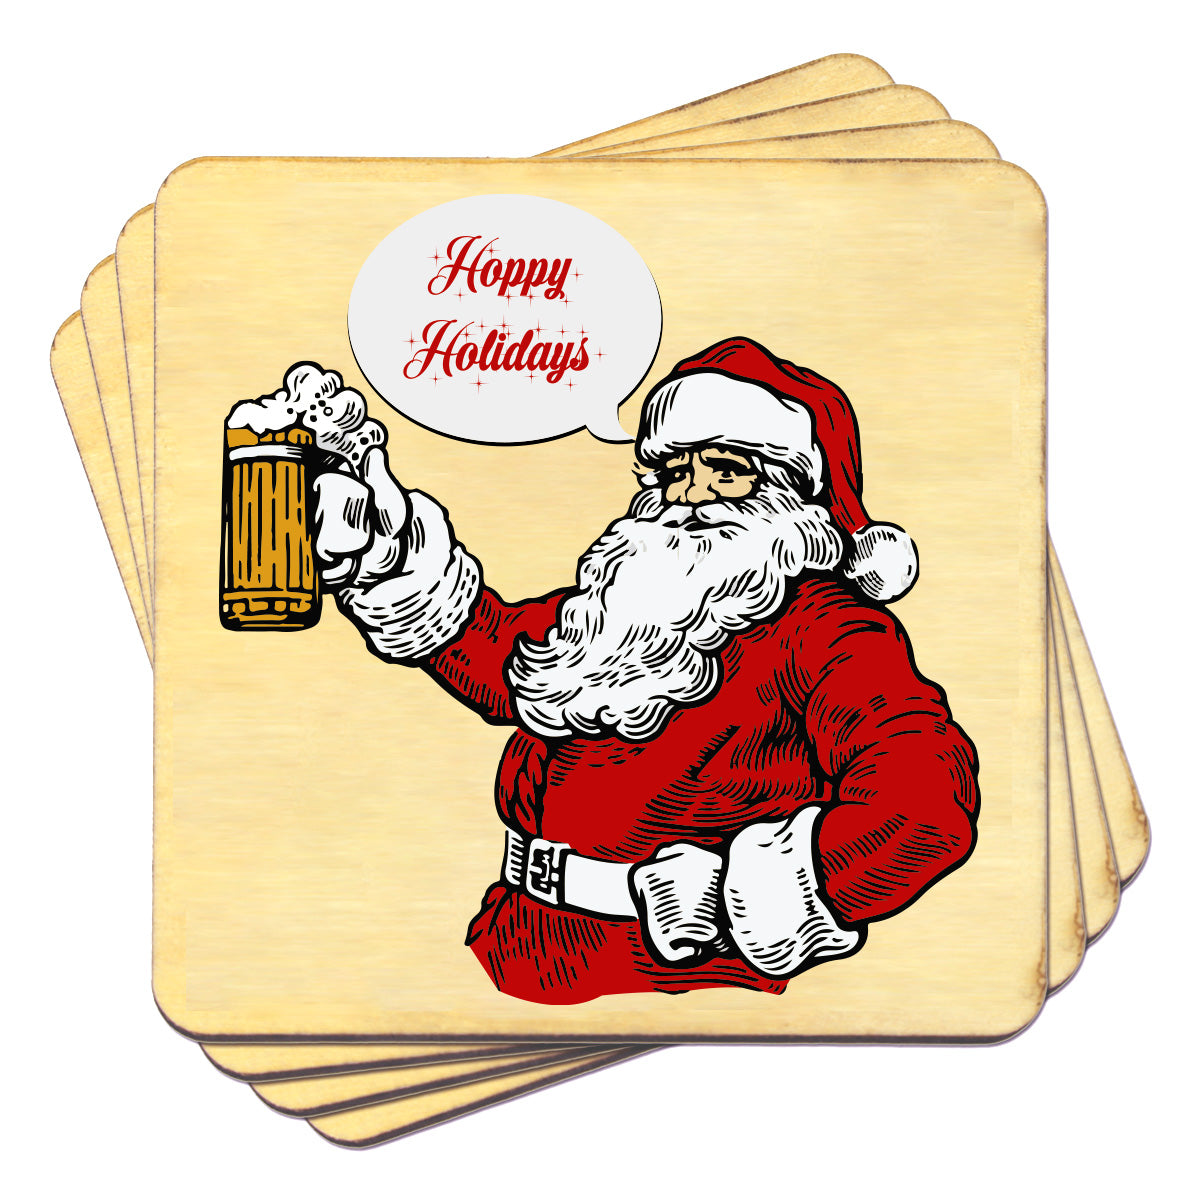 Hoppy Holidays Wooden Coasters Set of 4 - 3 Designs Available